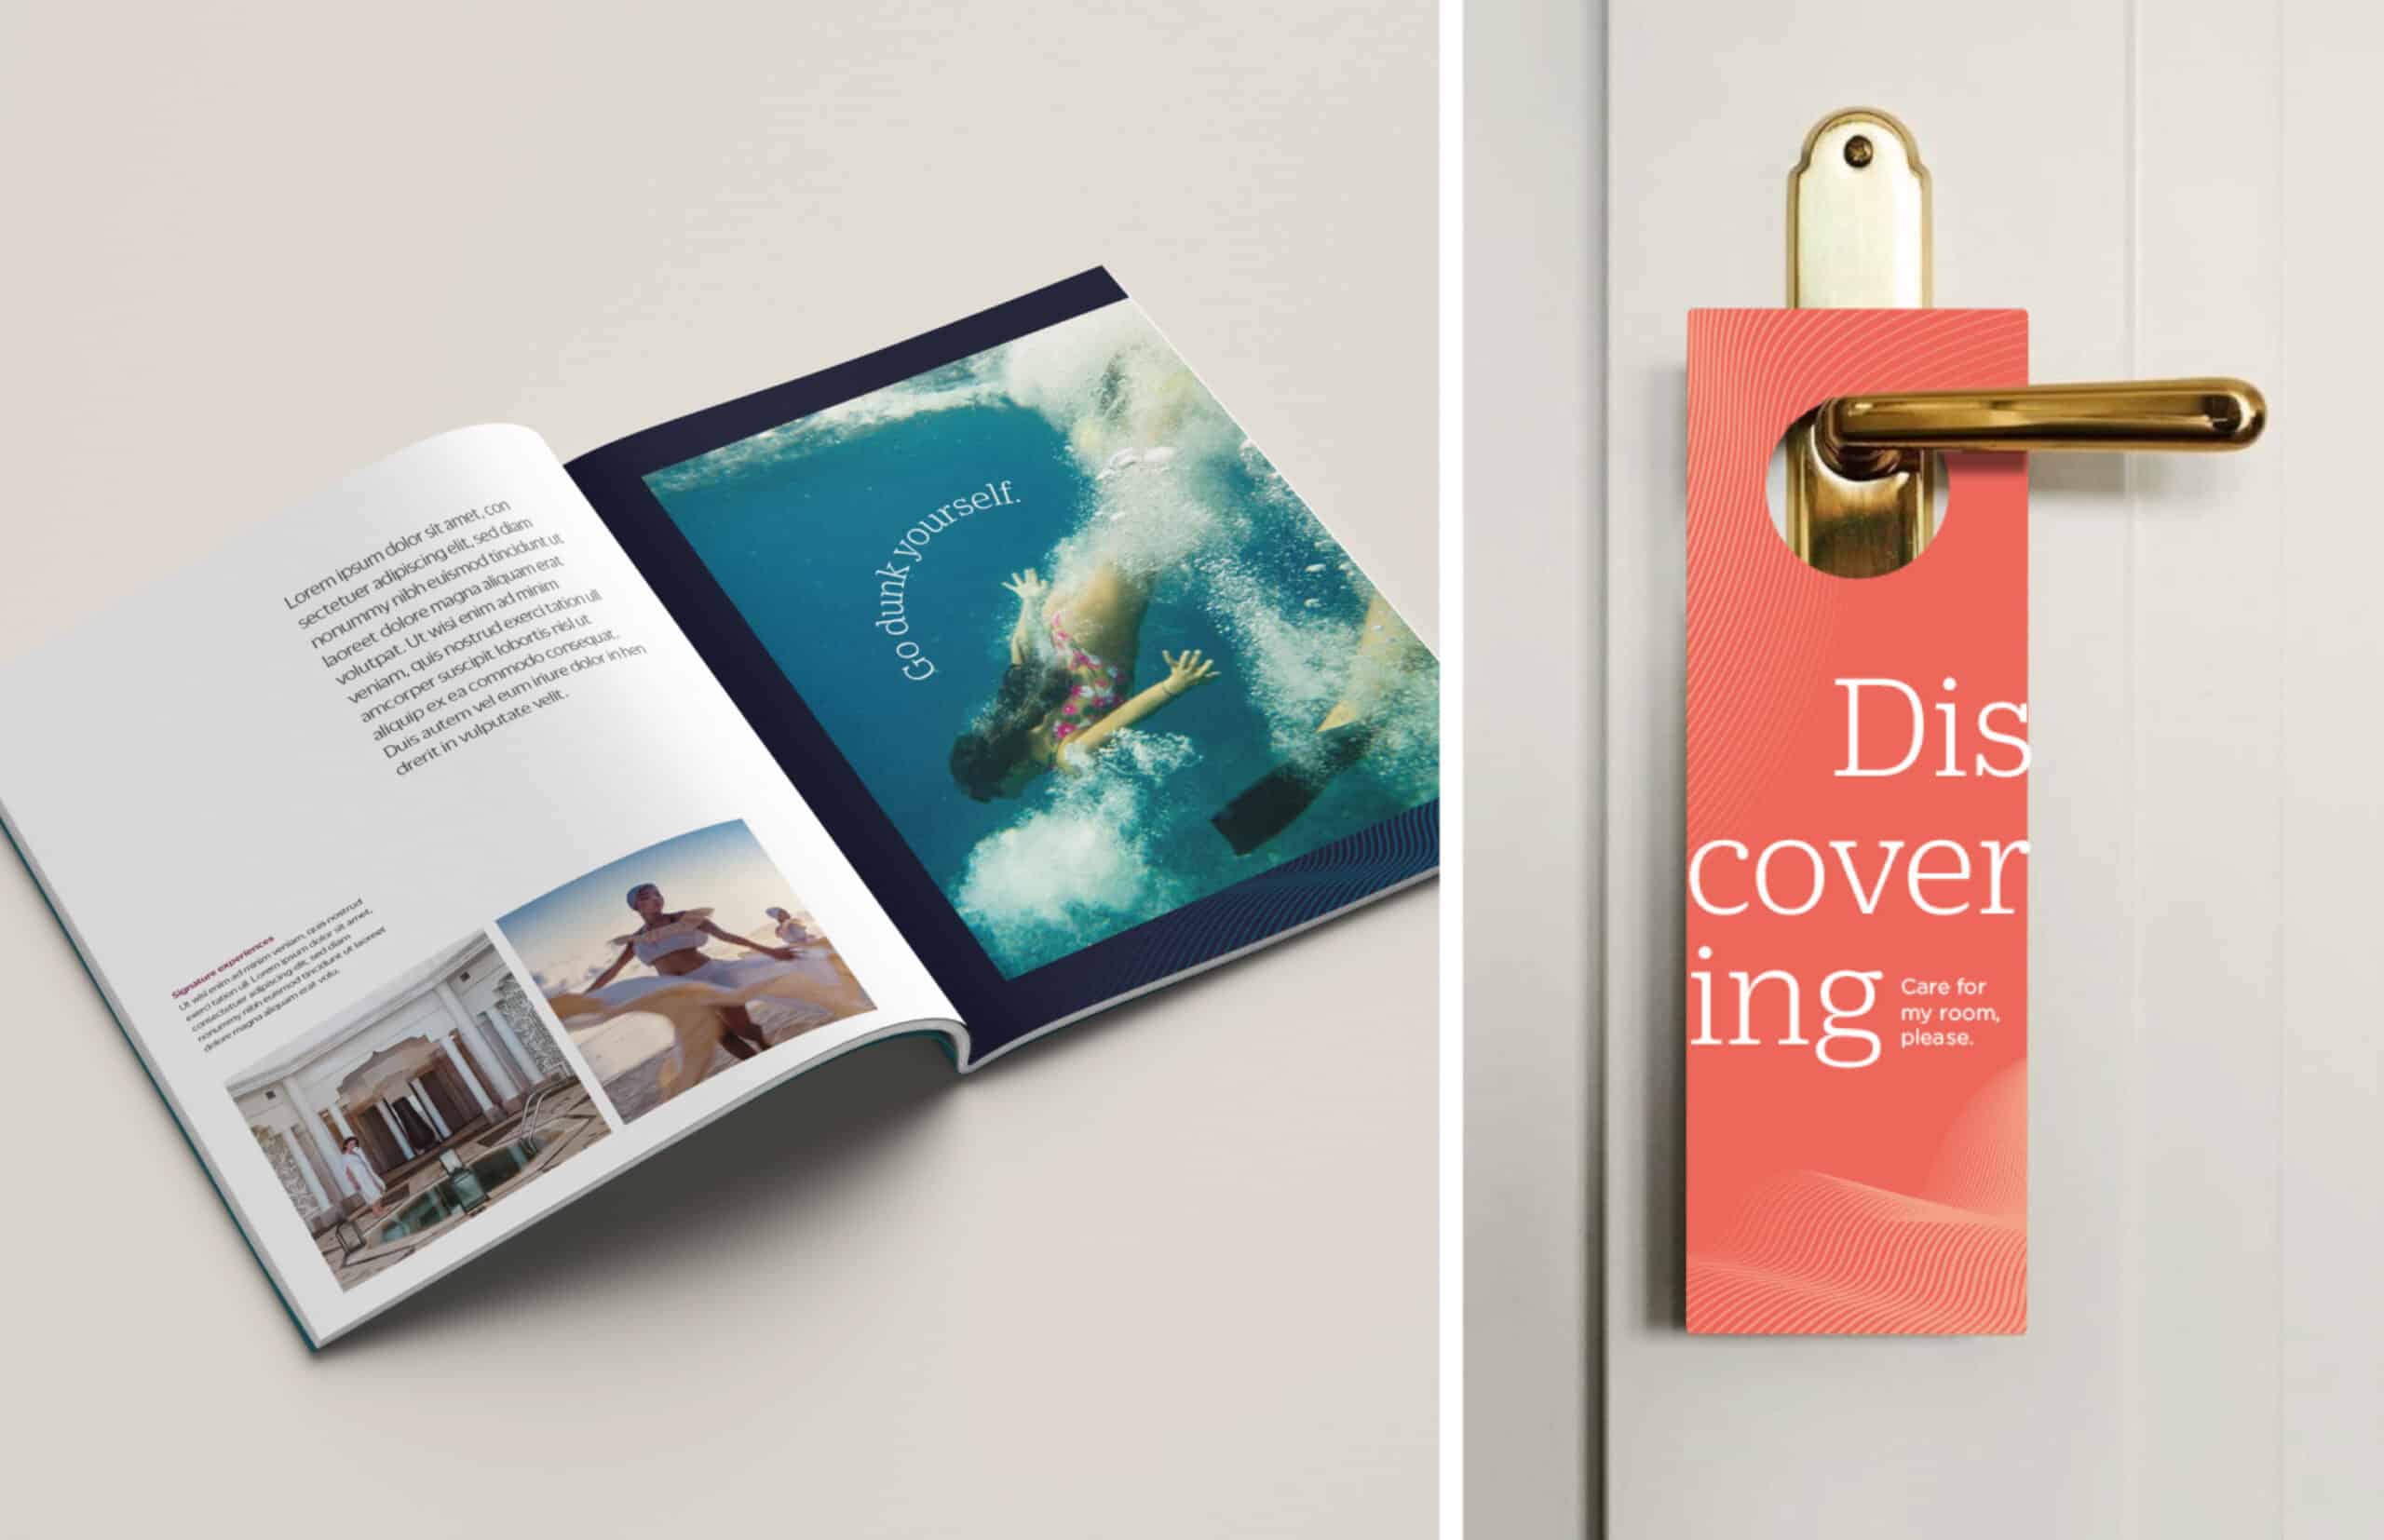 a two pane image, right side is an open magazine, left page shows some lorem ipsum copy with two smaller images, one of a tranquil resort spa and hot tub, the other of a woman mid twirl in a two-piece white, flowing dress on the beach. The right page is a full page image of a young girl diving in the ocean with copy reading, “Go dunk yourself”. The second pane shows a hotel door sign in coral with copy reading, “Discovering, Care for my room please.”